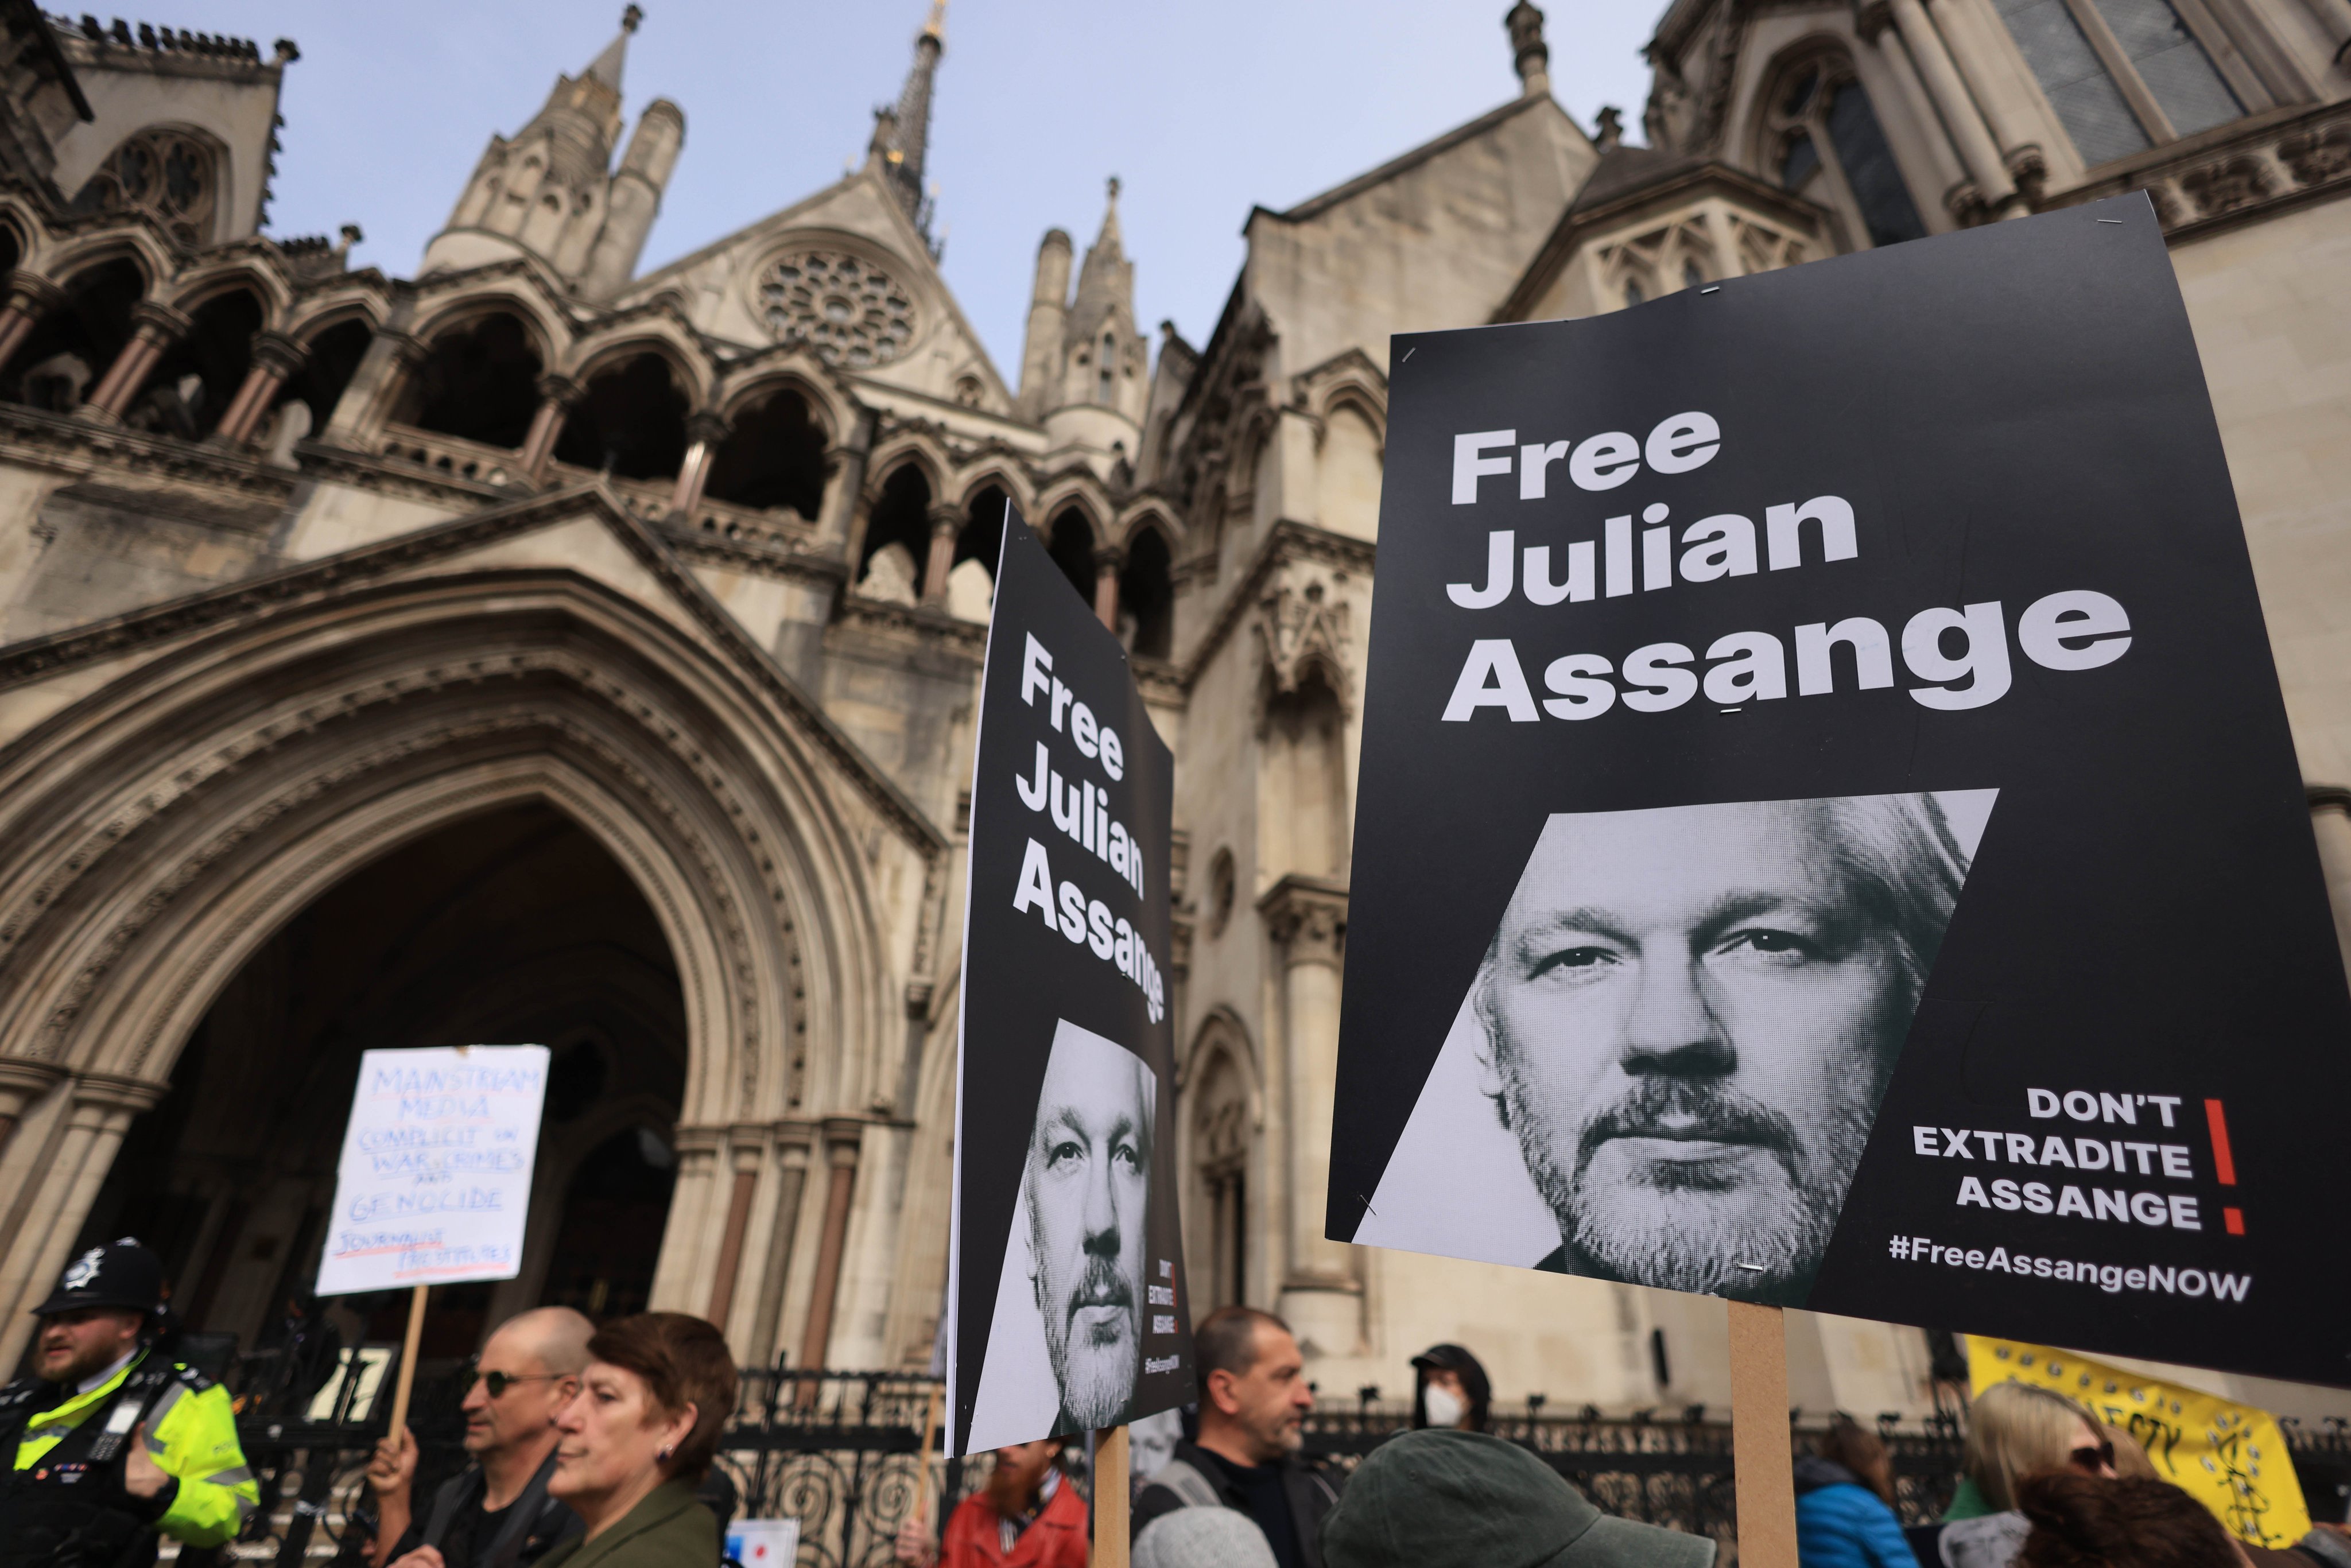 Julian Assange supporters protest outside the Royal Courts of Justice in London in March. Photo: EPA-EFE